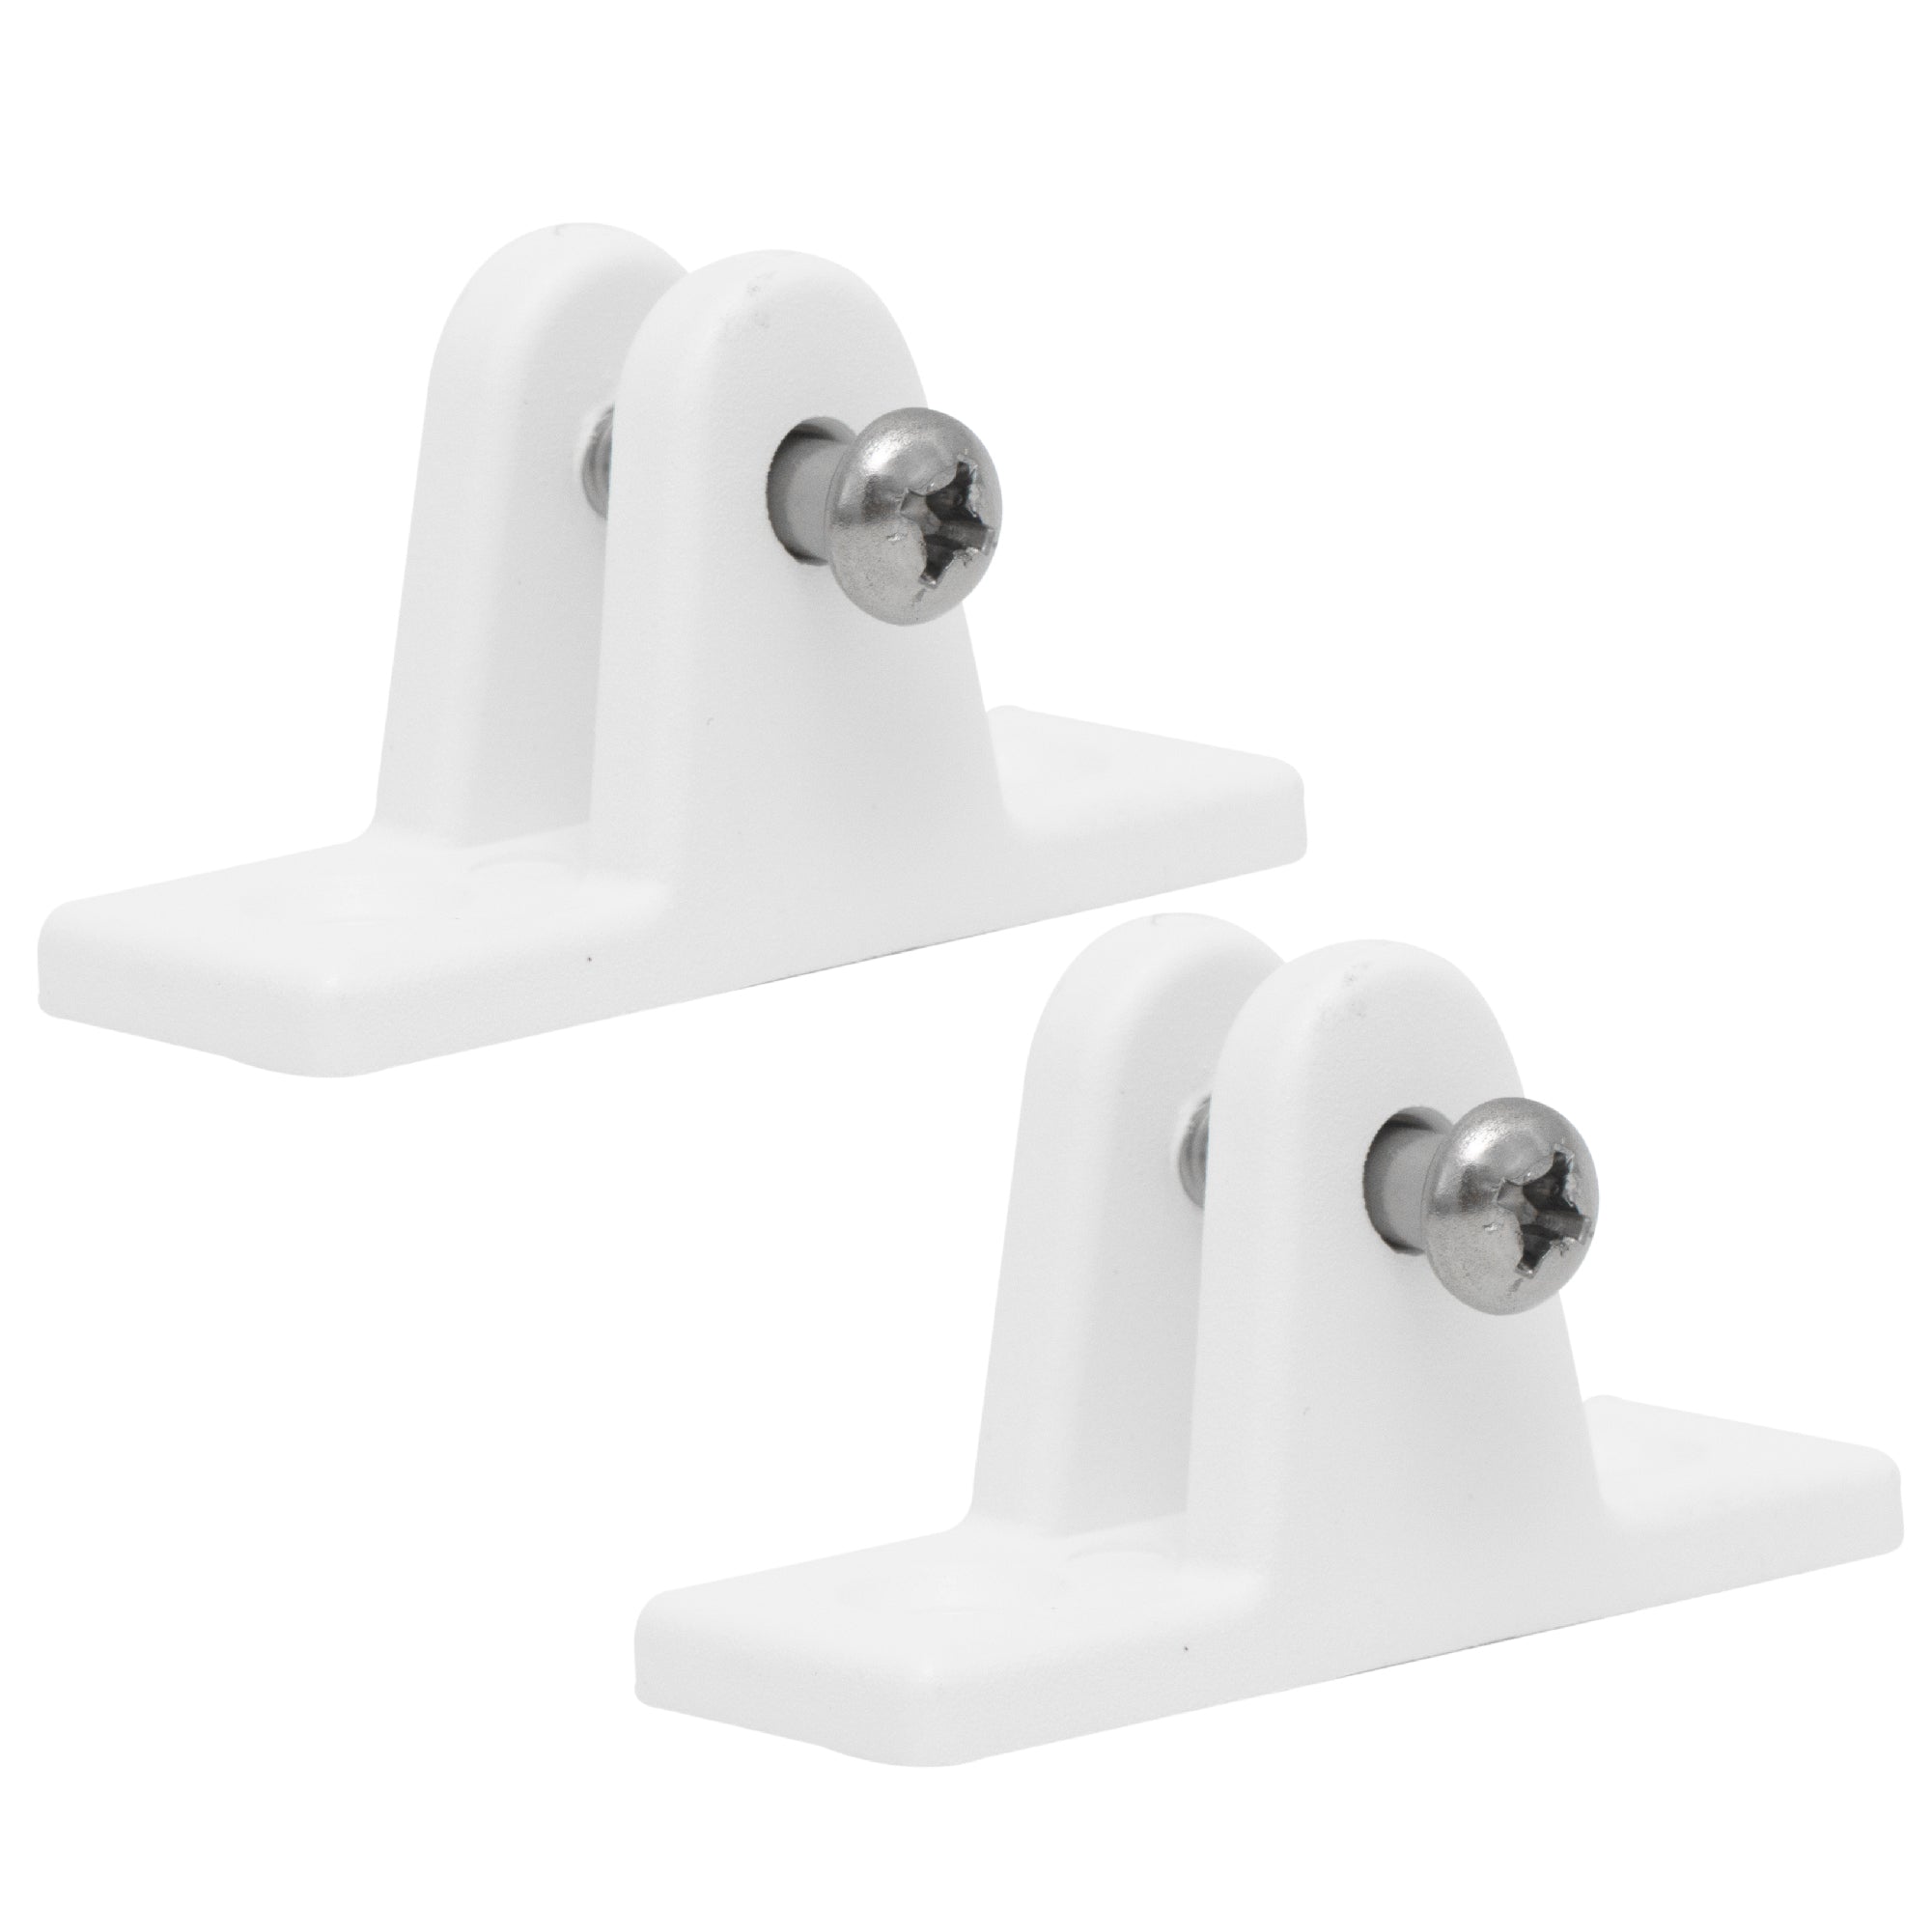 90 Degree Deck Hinge with Screw Pin, White Nylon 2-Pack - FO1879-M2